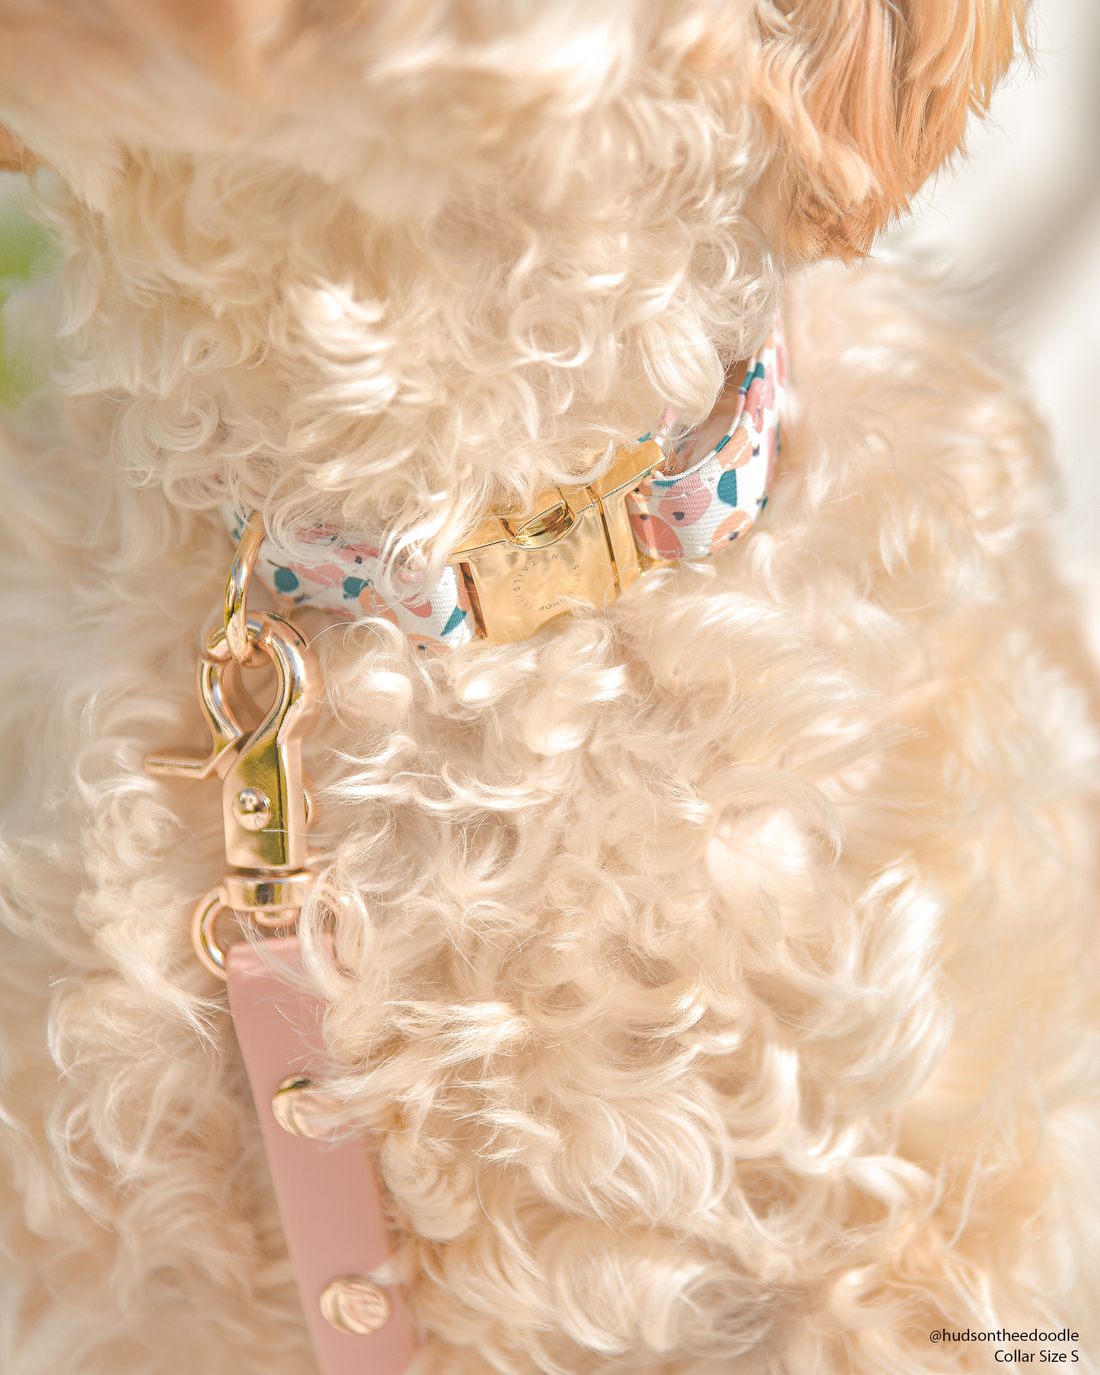 Peaches & Pears Dog Collar, Fruit Dog Collar, Available in 3 Sizes